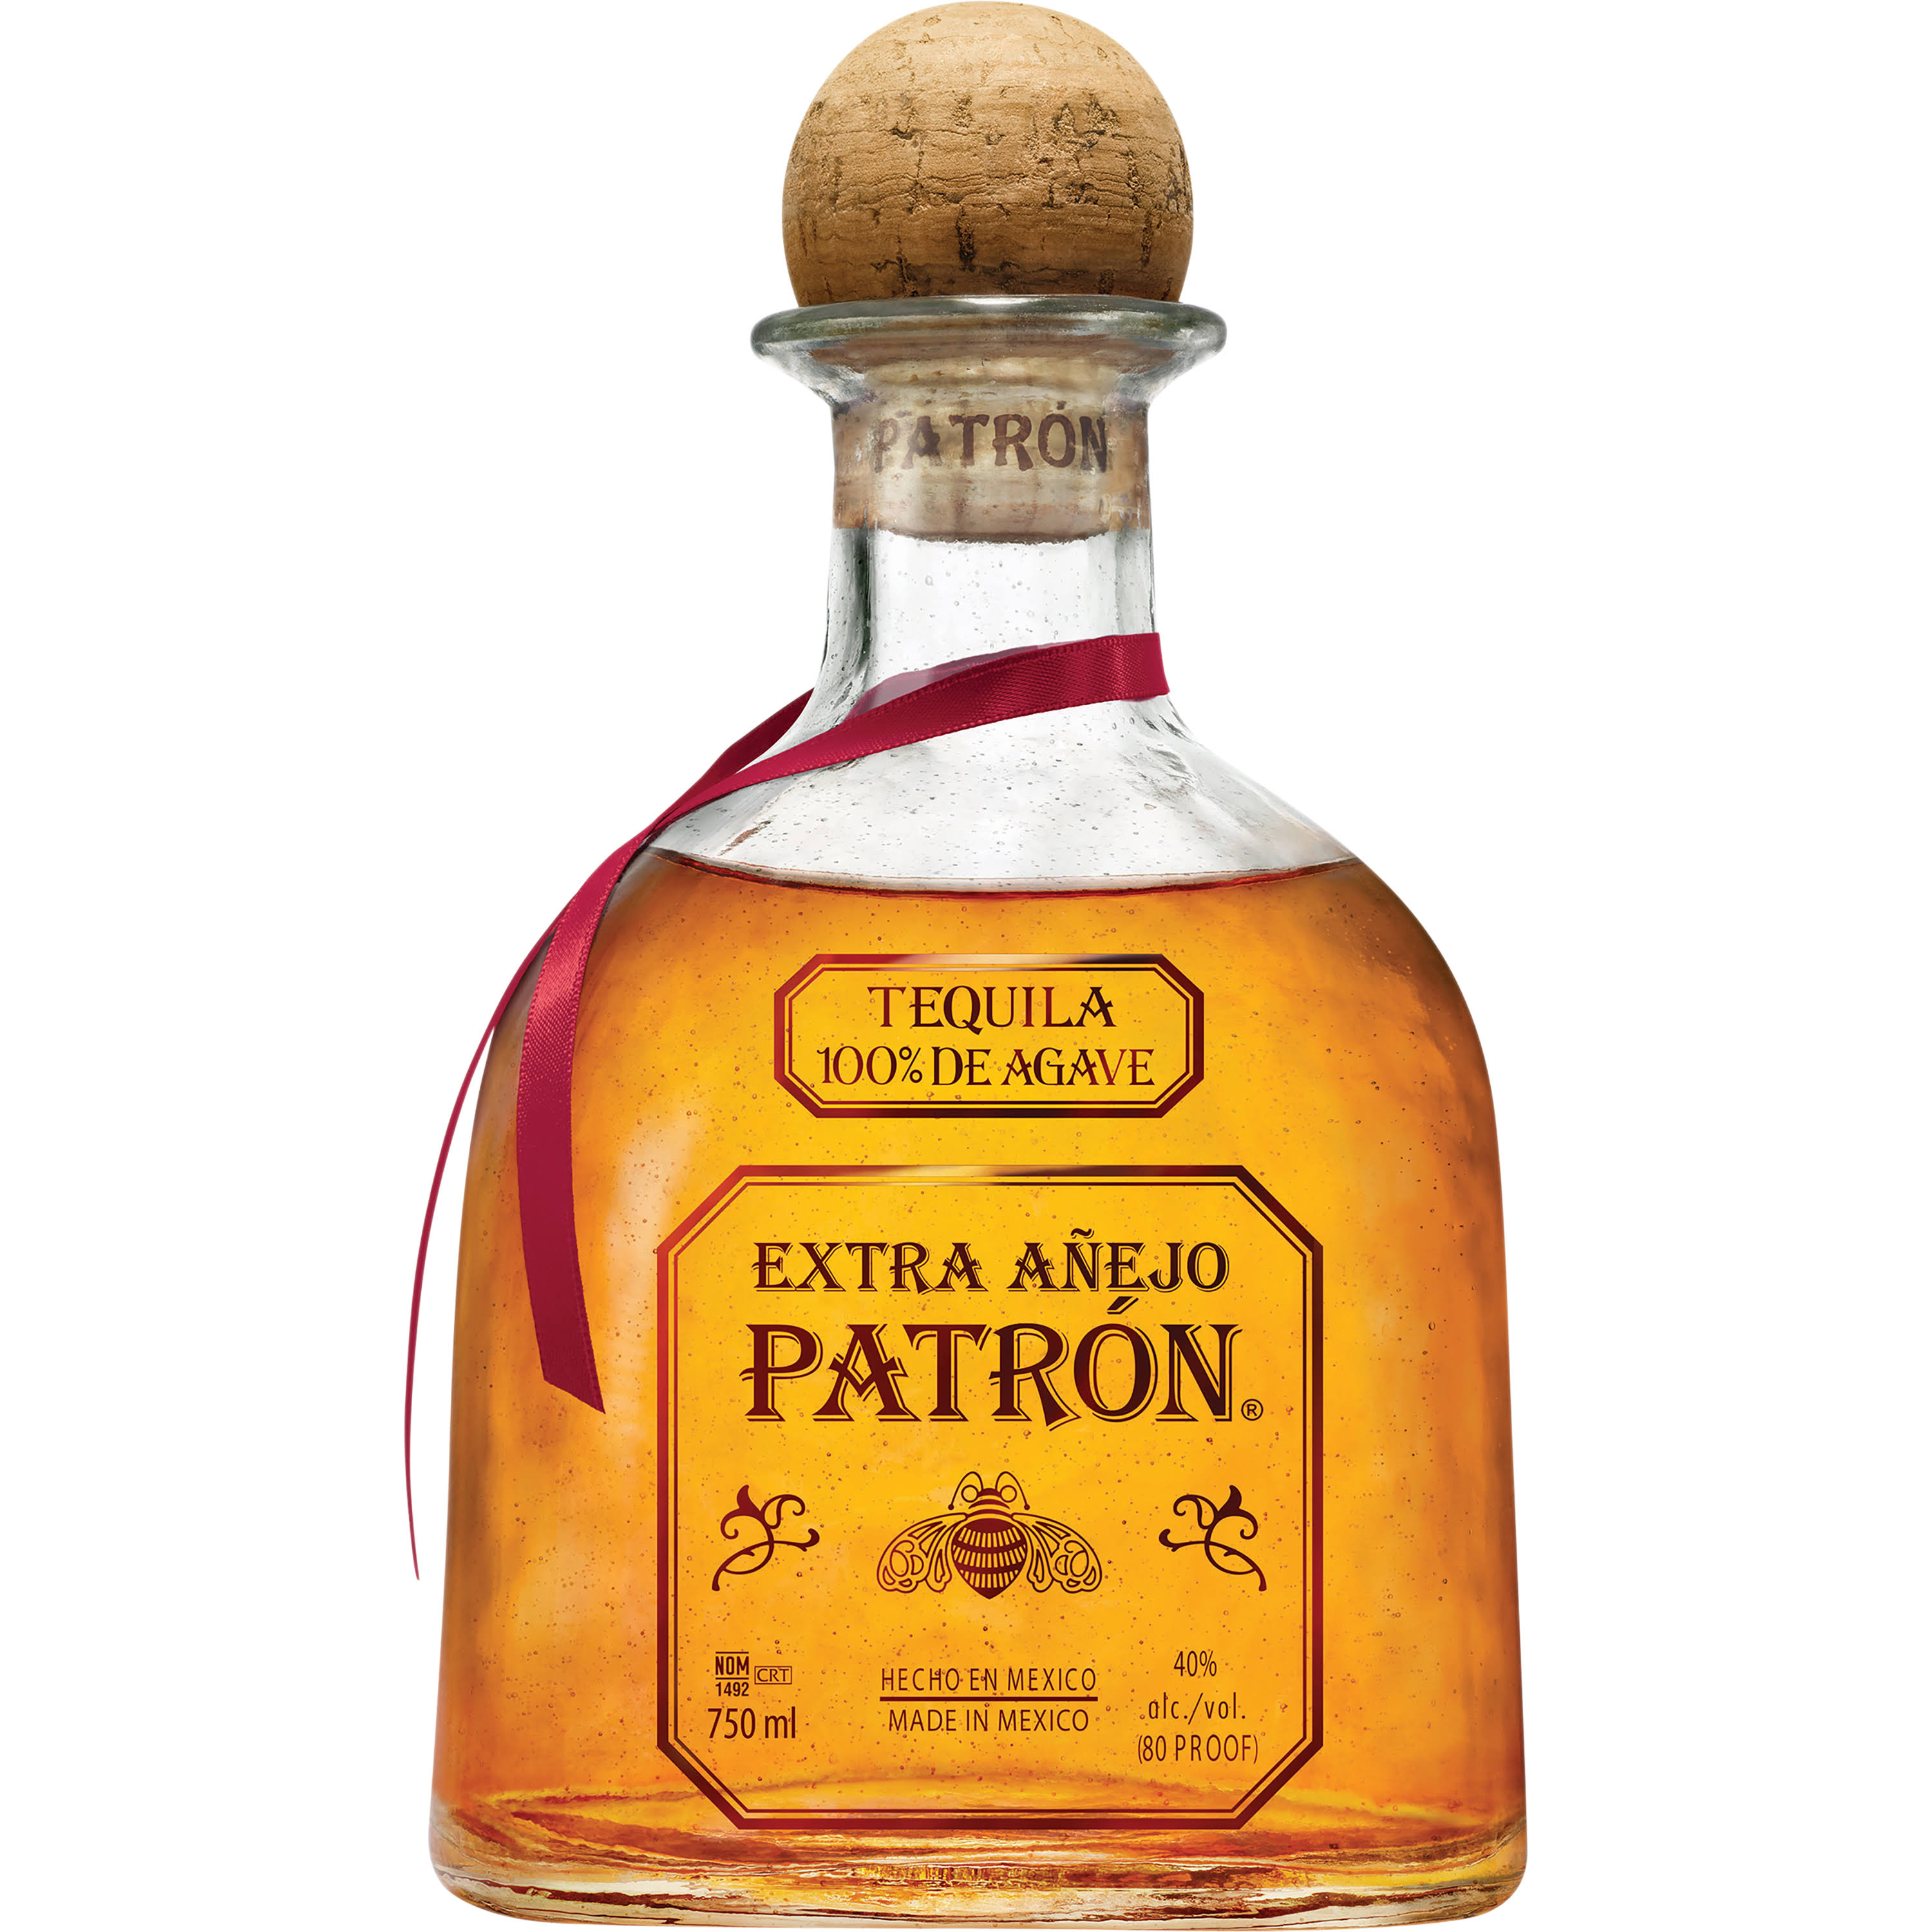 Patron Tequila, 100% De Agave, Imported, Extra Anejo - 750 ml